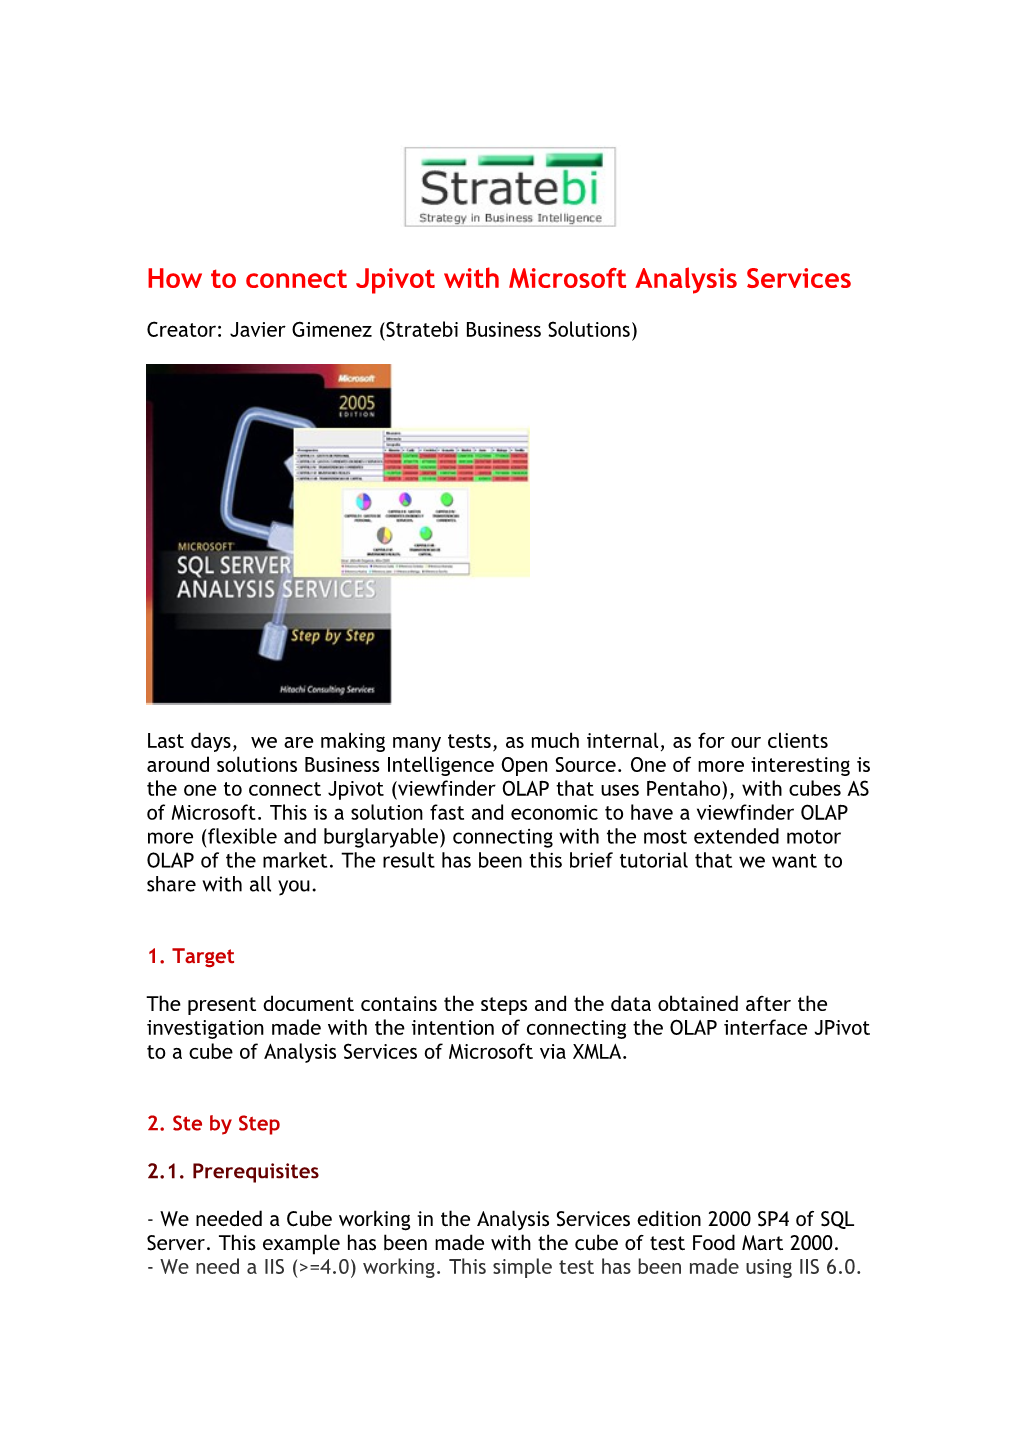 How to Connect Jpivot with Microsoft Analysis Services